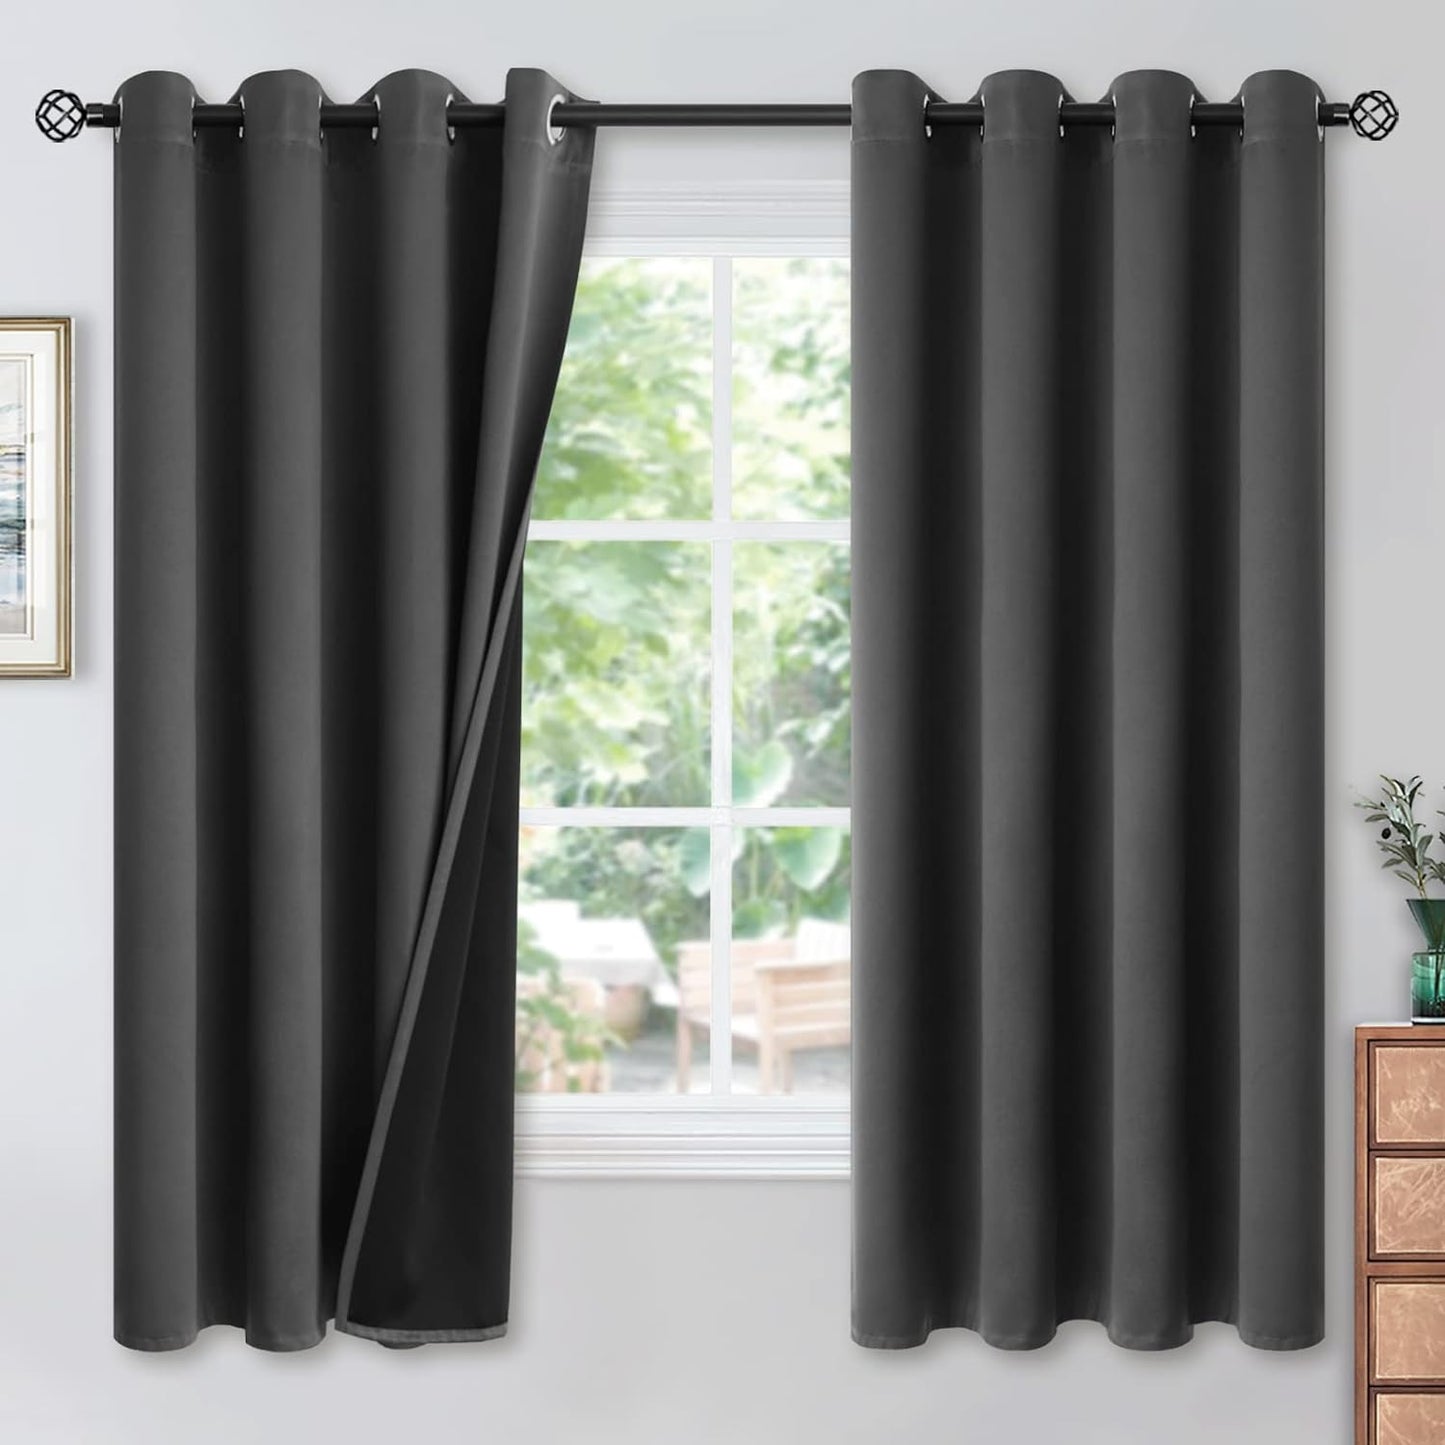 Youngstex Black 100% Blackout Curtains 63 Inches for Bedroom Thermal Insulated Total Room Darkening Curtains for Living Room Window with Black Back Grommet, 2 Panels, 42 X 63 Inch  YoungsTex Dark Grey 52W X 63L 